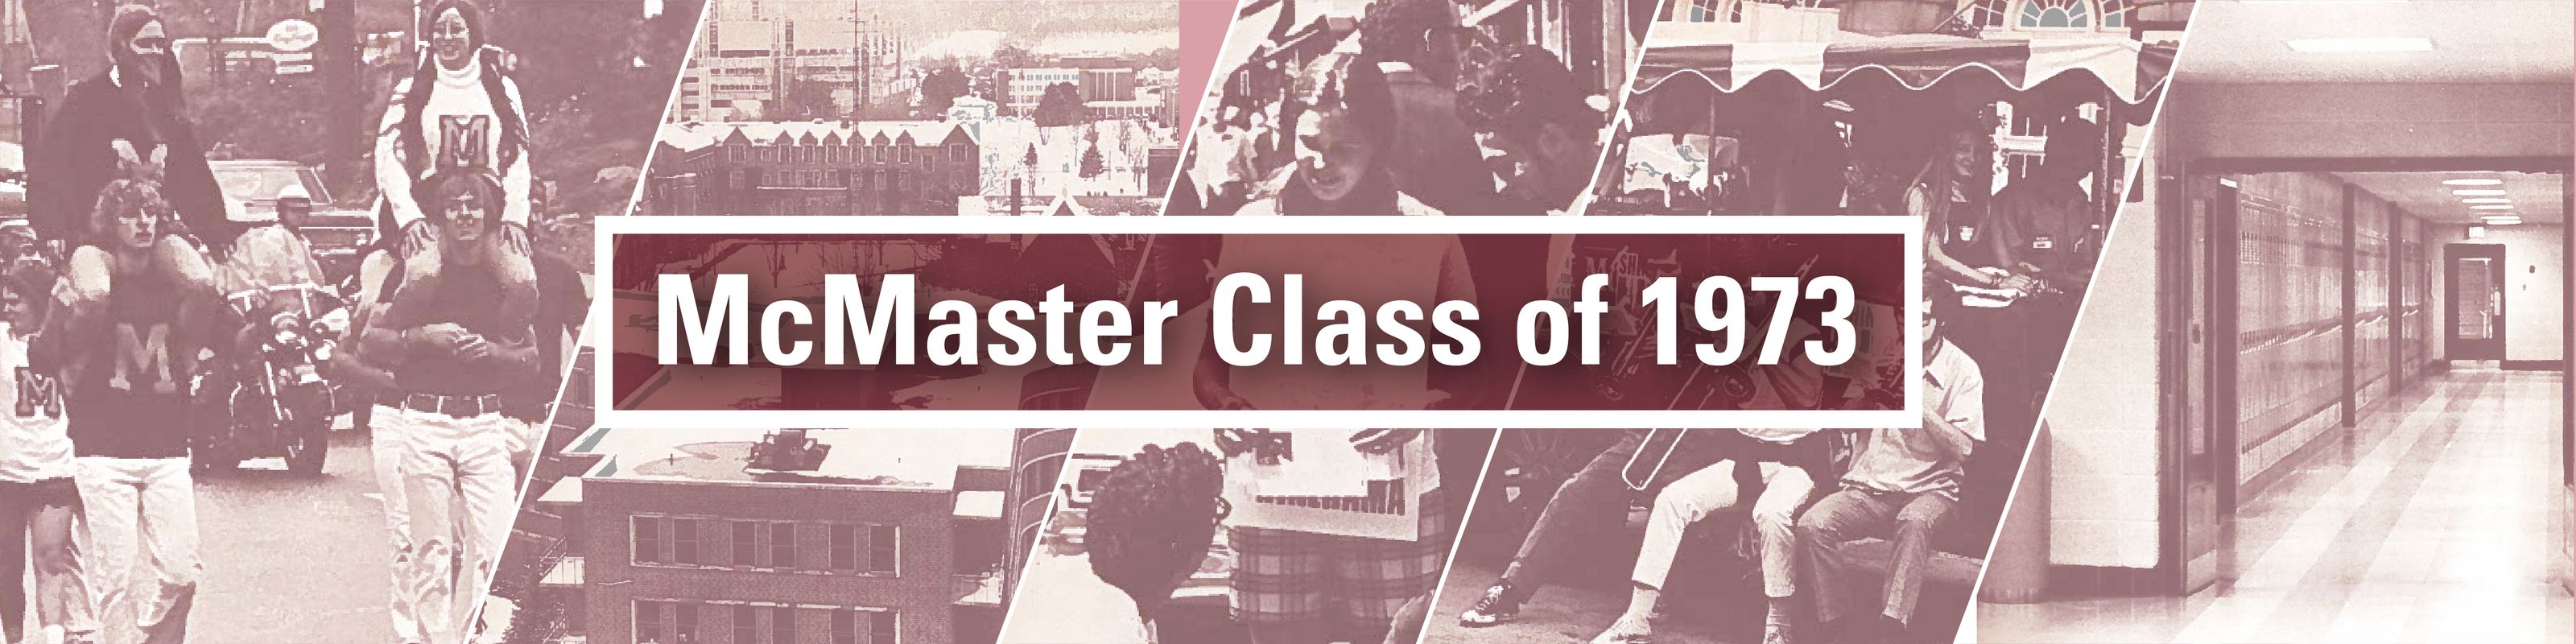 McMaster Class of 1973